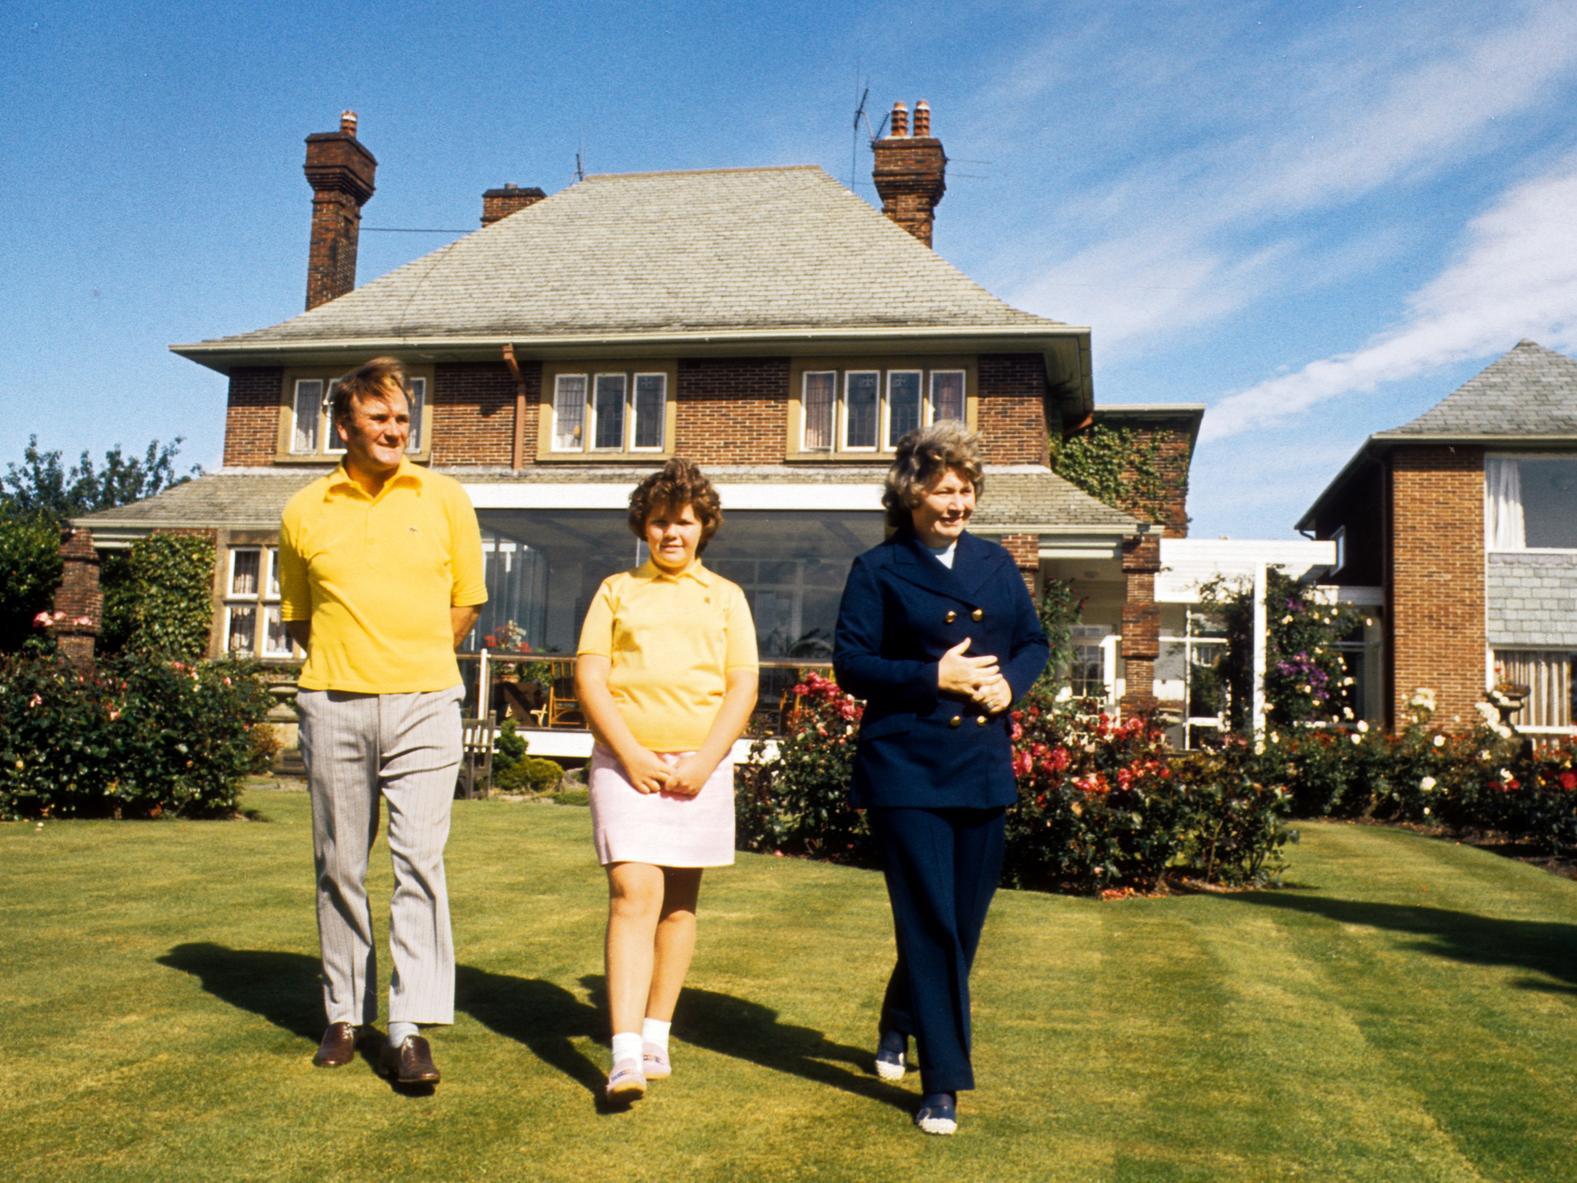 Look out for part 2. This photo shows Don Revie his wife and their daughter at home in September 1972.